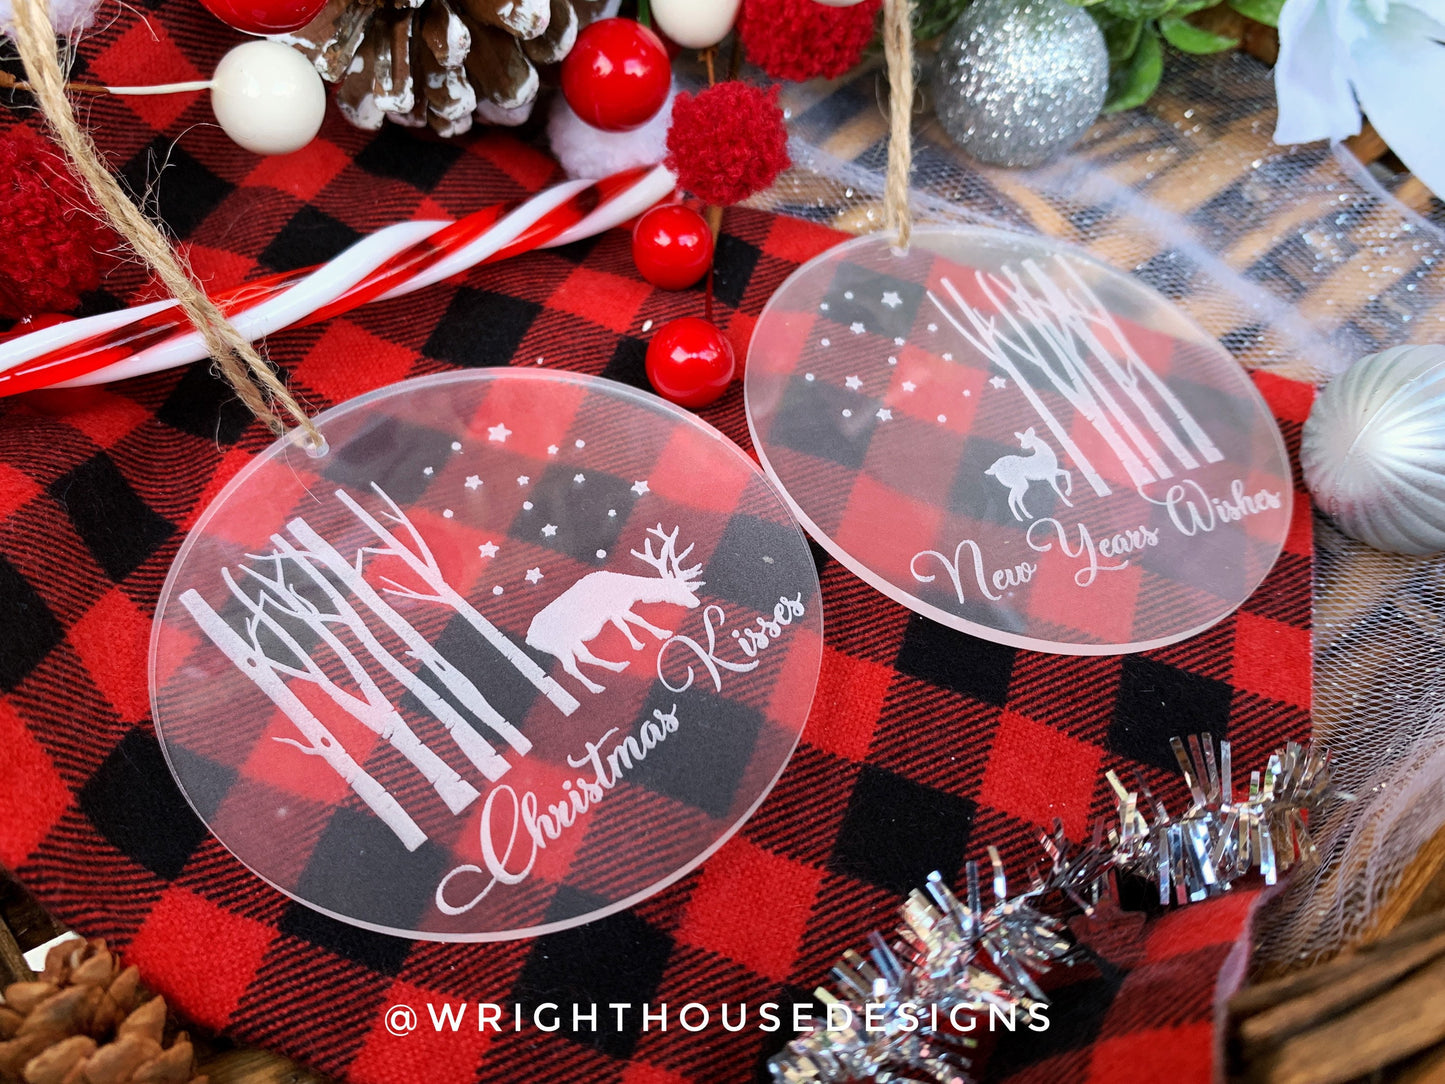 Reindeer Winter Night Sky Wooded Scene - Christmas Kisses - New Years Wishes - Laser Engraved Frosted Acrylic Christmas Tree Ornament Set